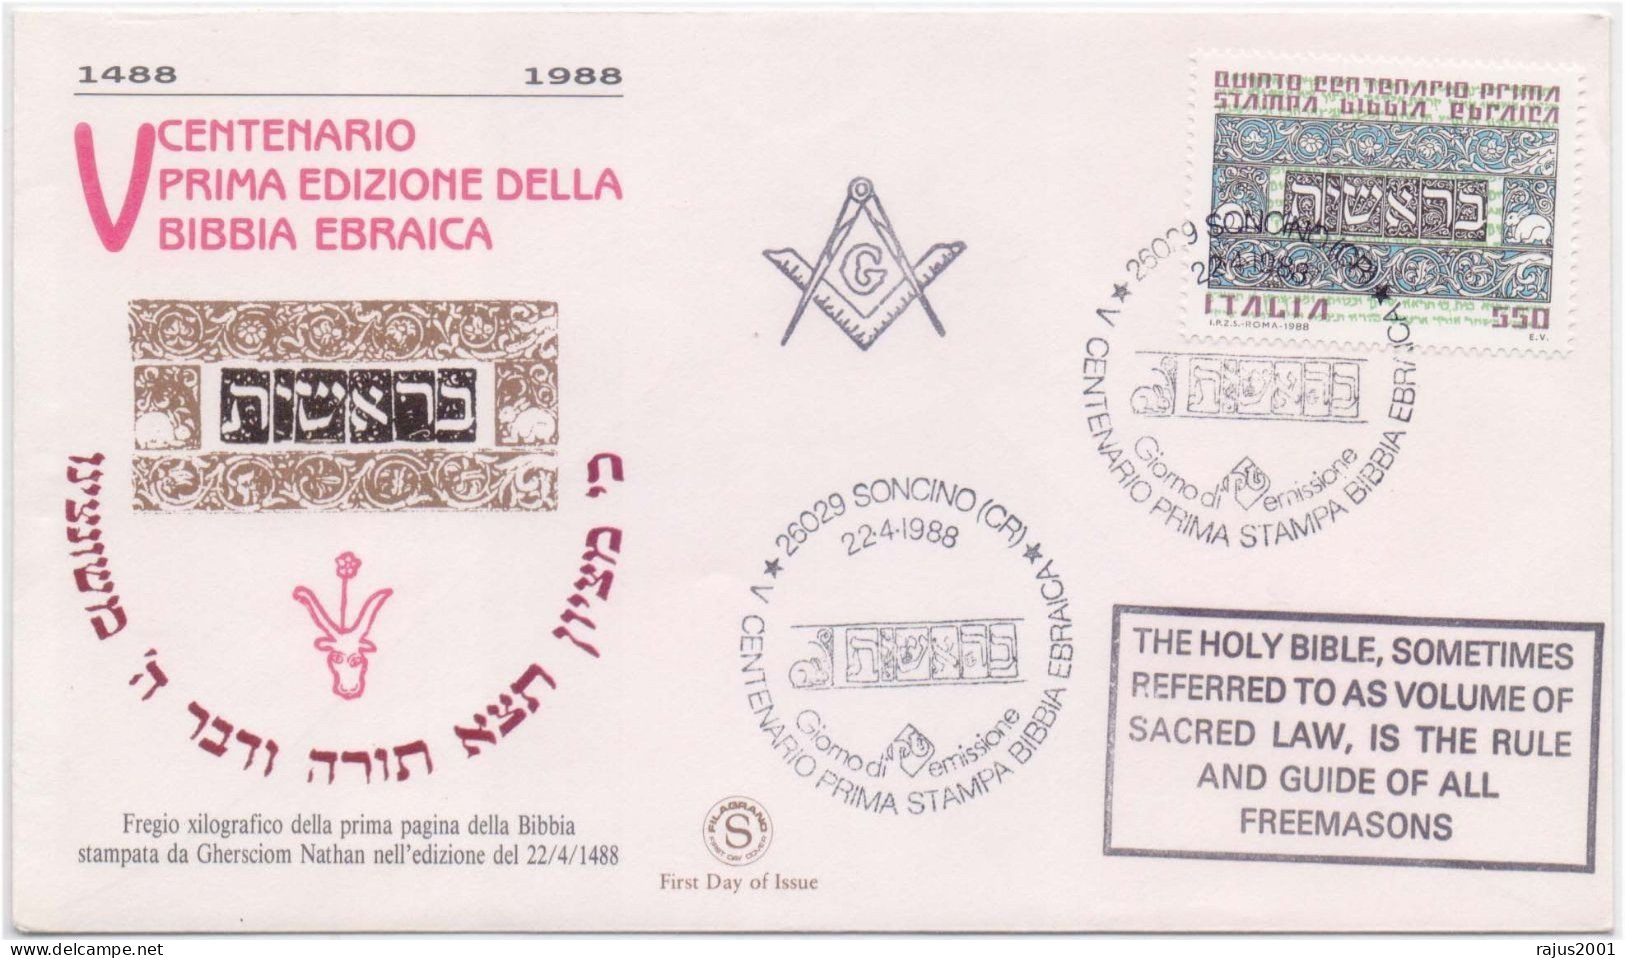 Holy Bible Volume Of Sacred Law, Is The Rule And Guide Of All Freemasons, Judaica, Freemasonry Masonic, Italy FDC - Freimaurerei